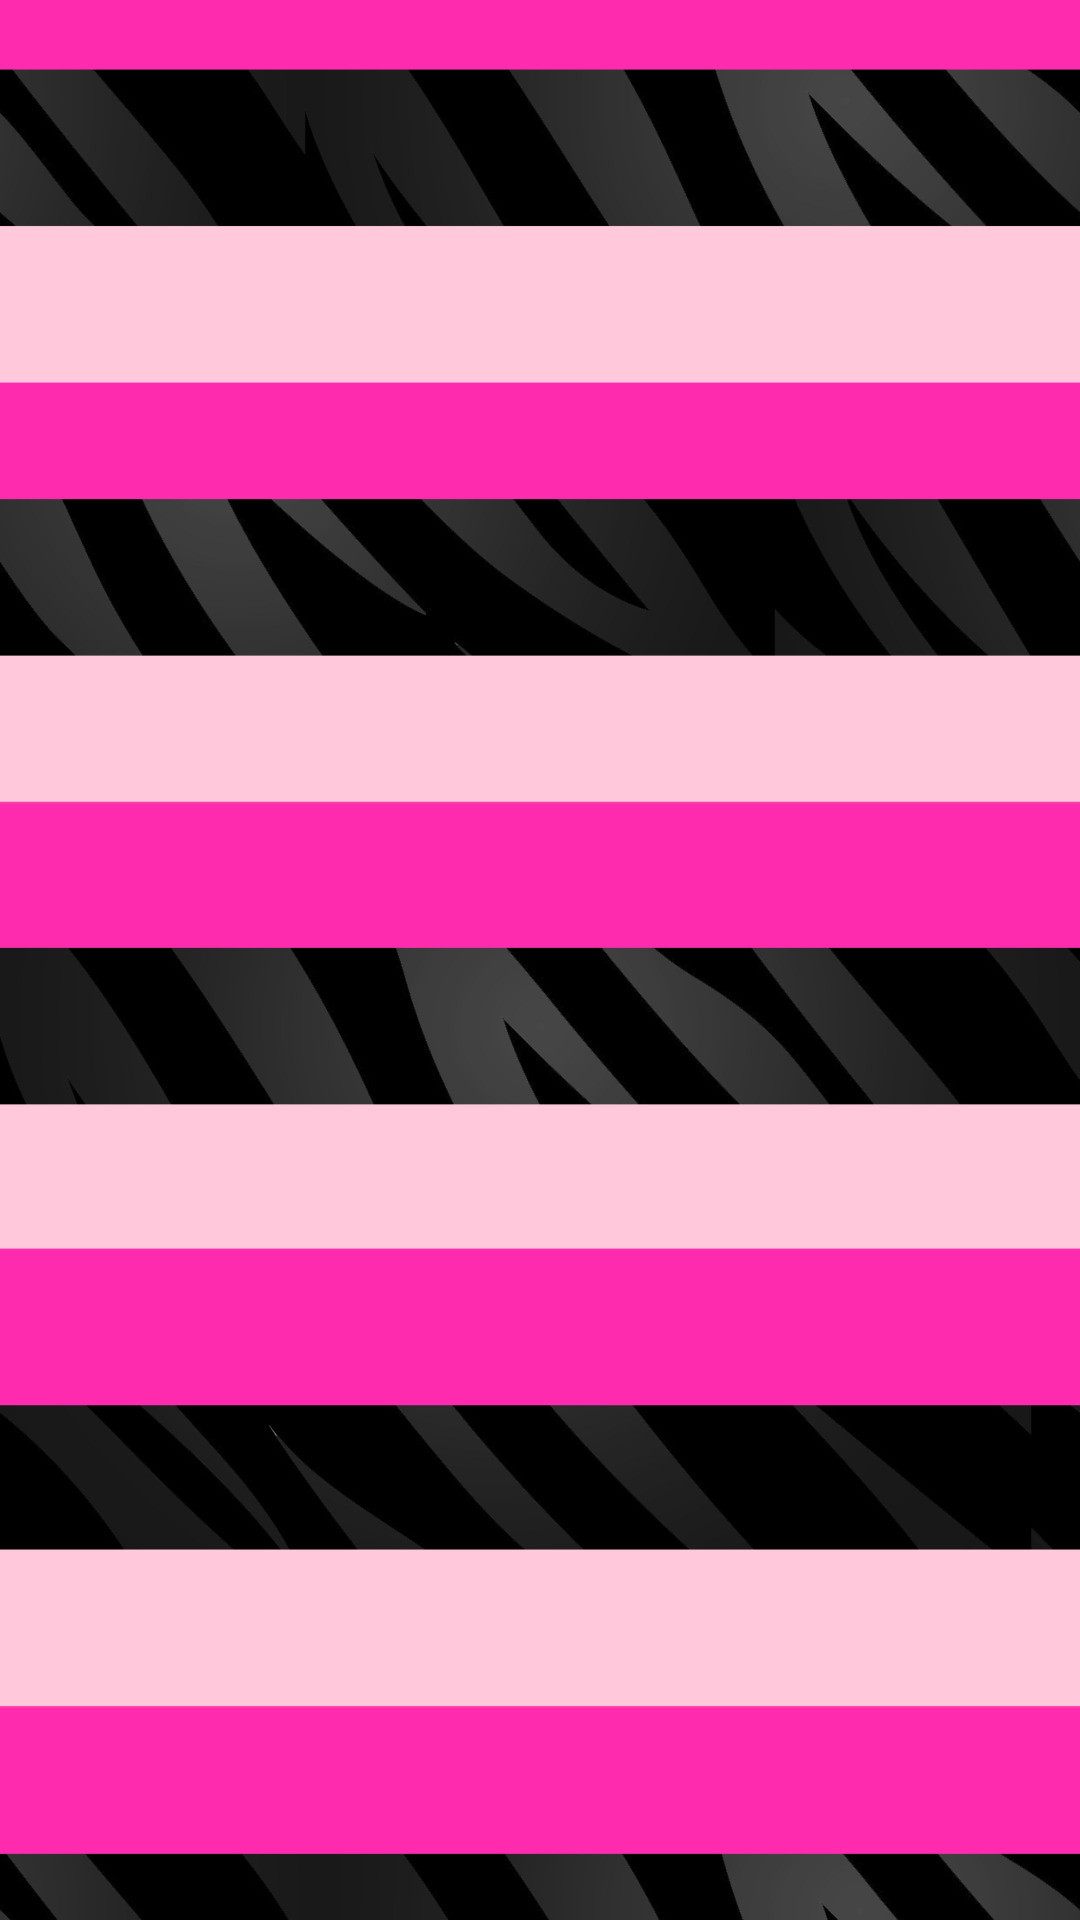 1080x1920 Black Stripes, Pink Black, Hot Pink, Chevron Wallpaper, Phone Backgrounds,  Wallpaper Backgrounds, Iphone Wallpapers, Pink Sparkly, Hello Kitty  Wallpaper